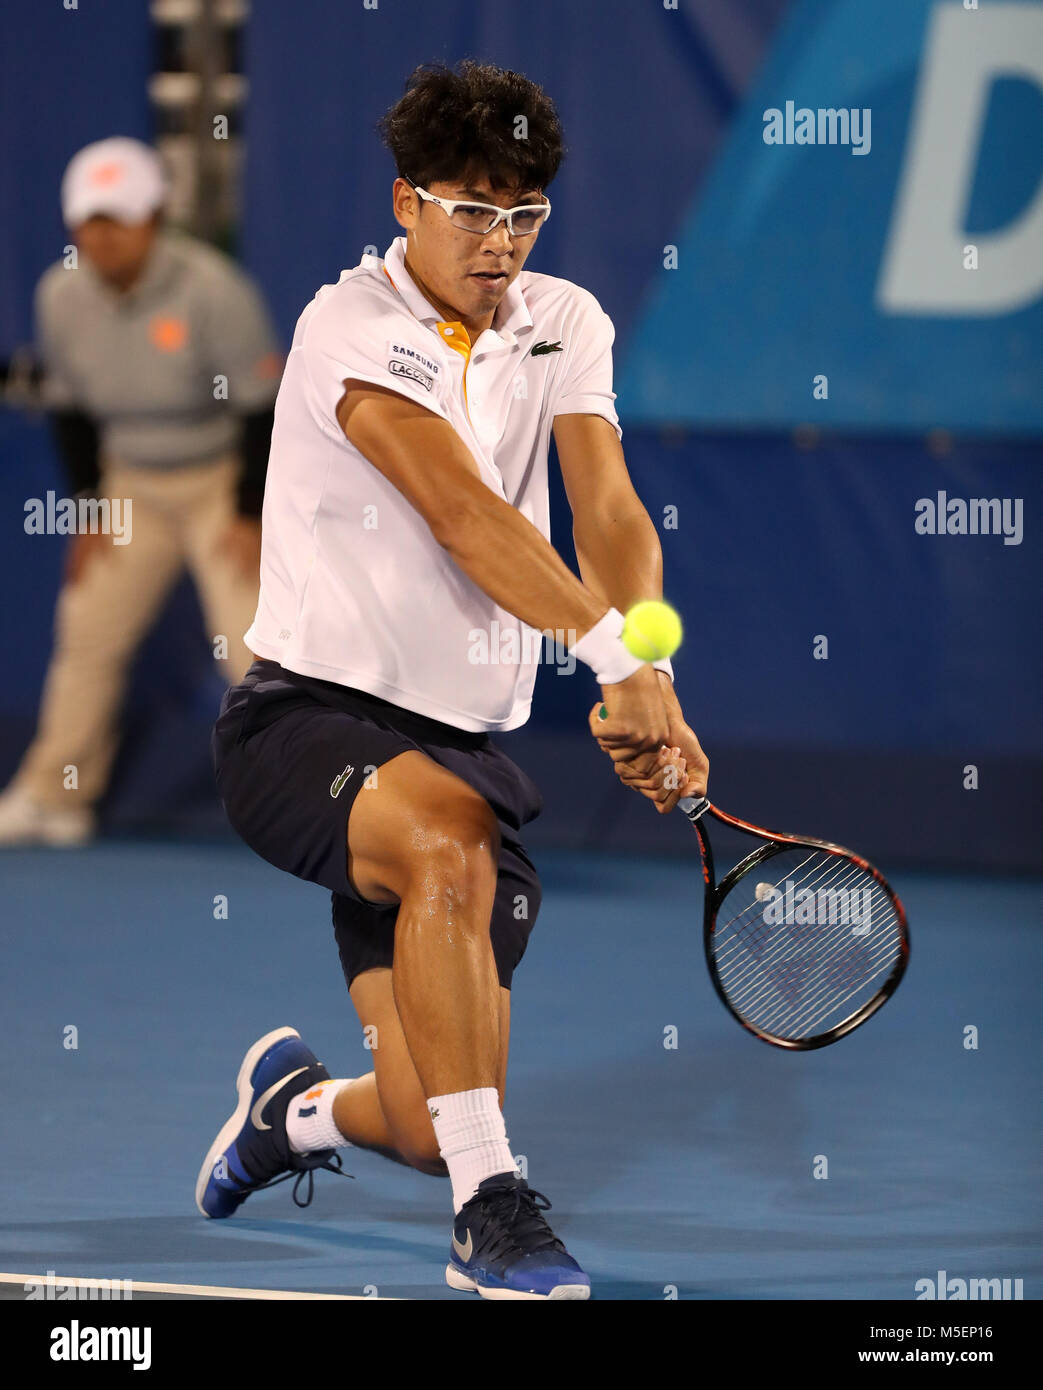 Delray Beach, Florida, USA. 22nd Feb, 2018. Hyeon Chung, from Korea, hits a  backhand against Franko Skugor, from Croatia, during the 2018 Delray Beach  Open ATP professional tennis tournament, played at the